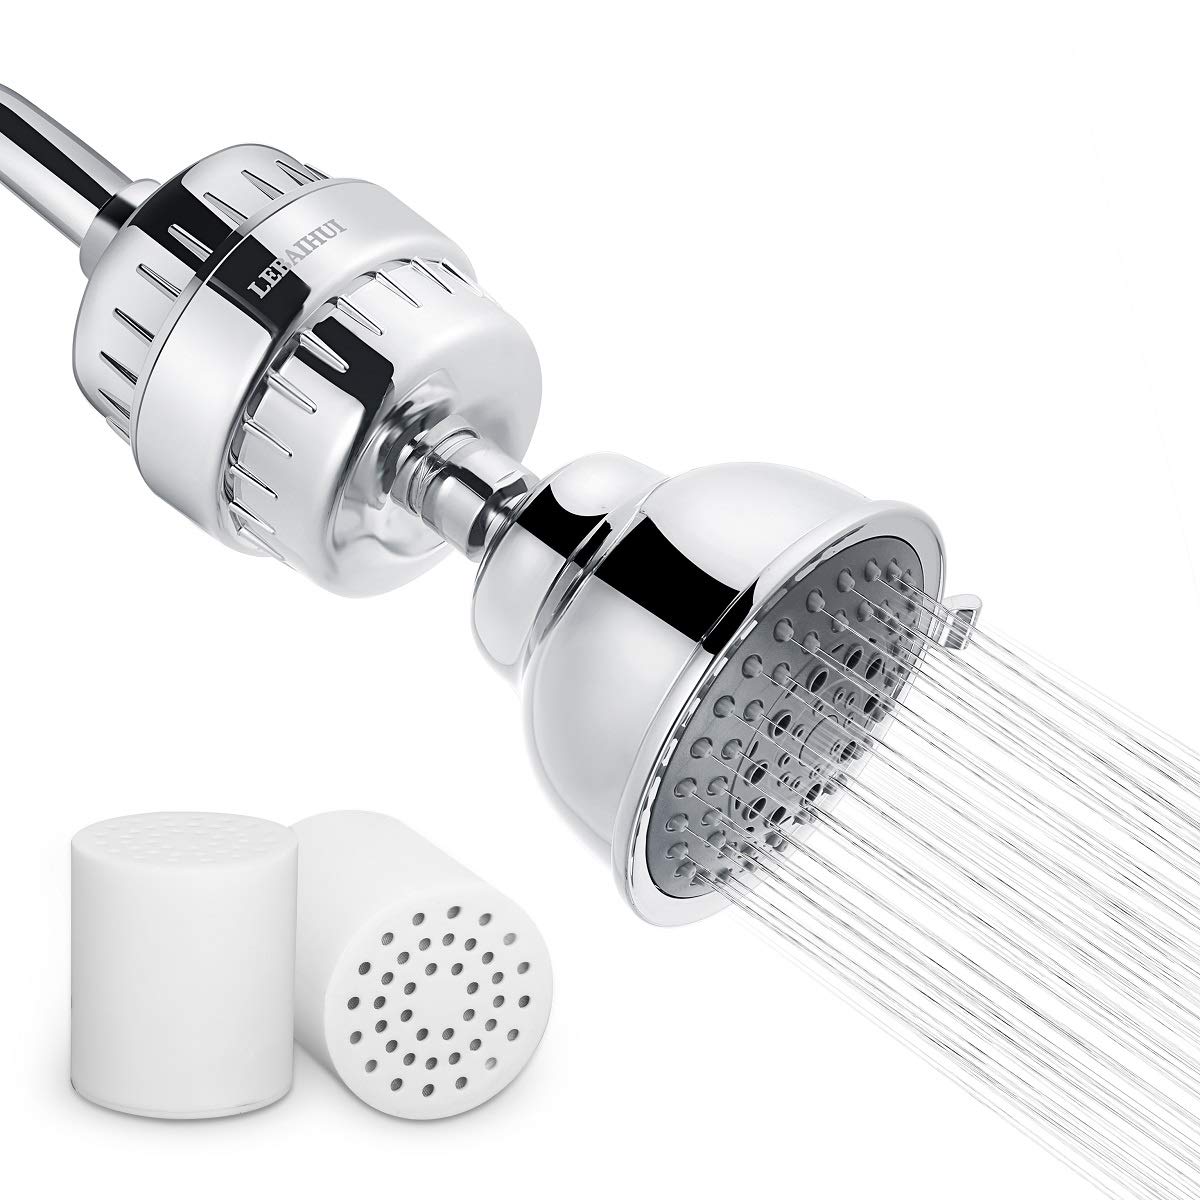 How Often Should A Showerhead Filter Be Changed